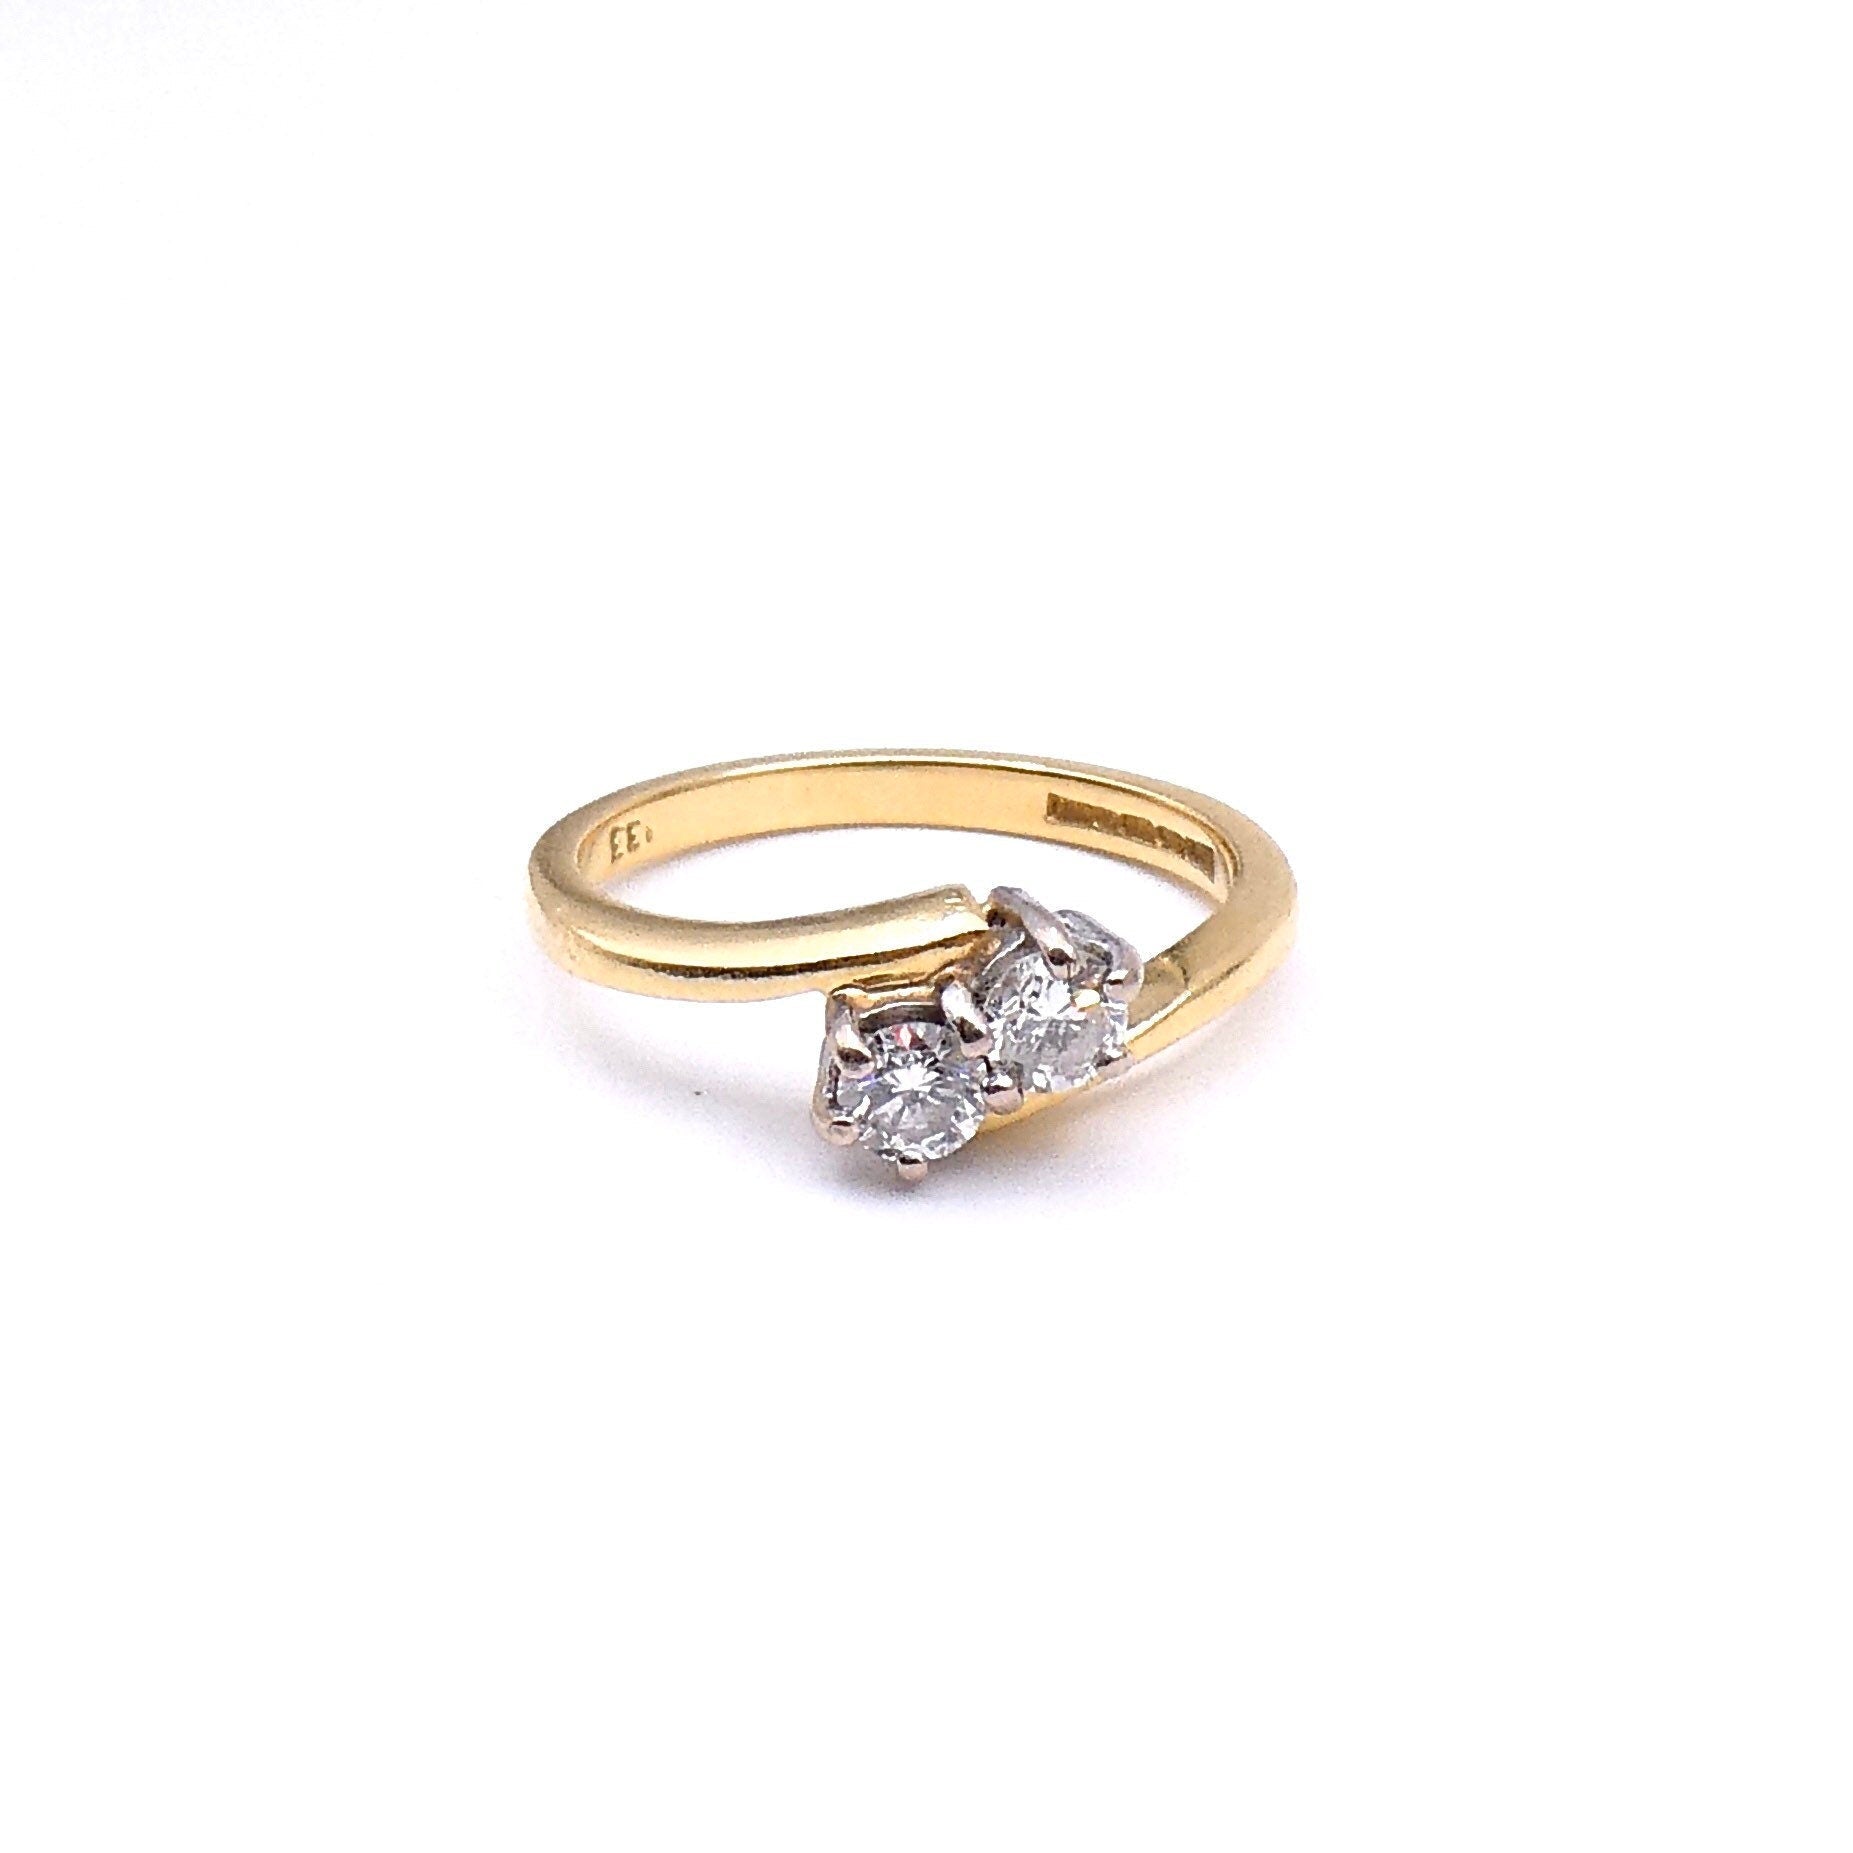 Diamond promise ring, a two stone diamond twist ring in 18kt gold a classic style. - Collected